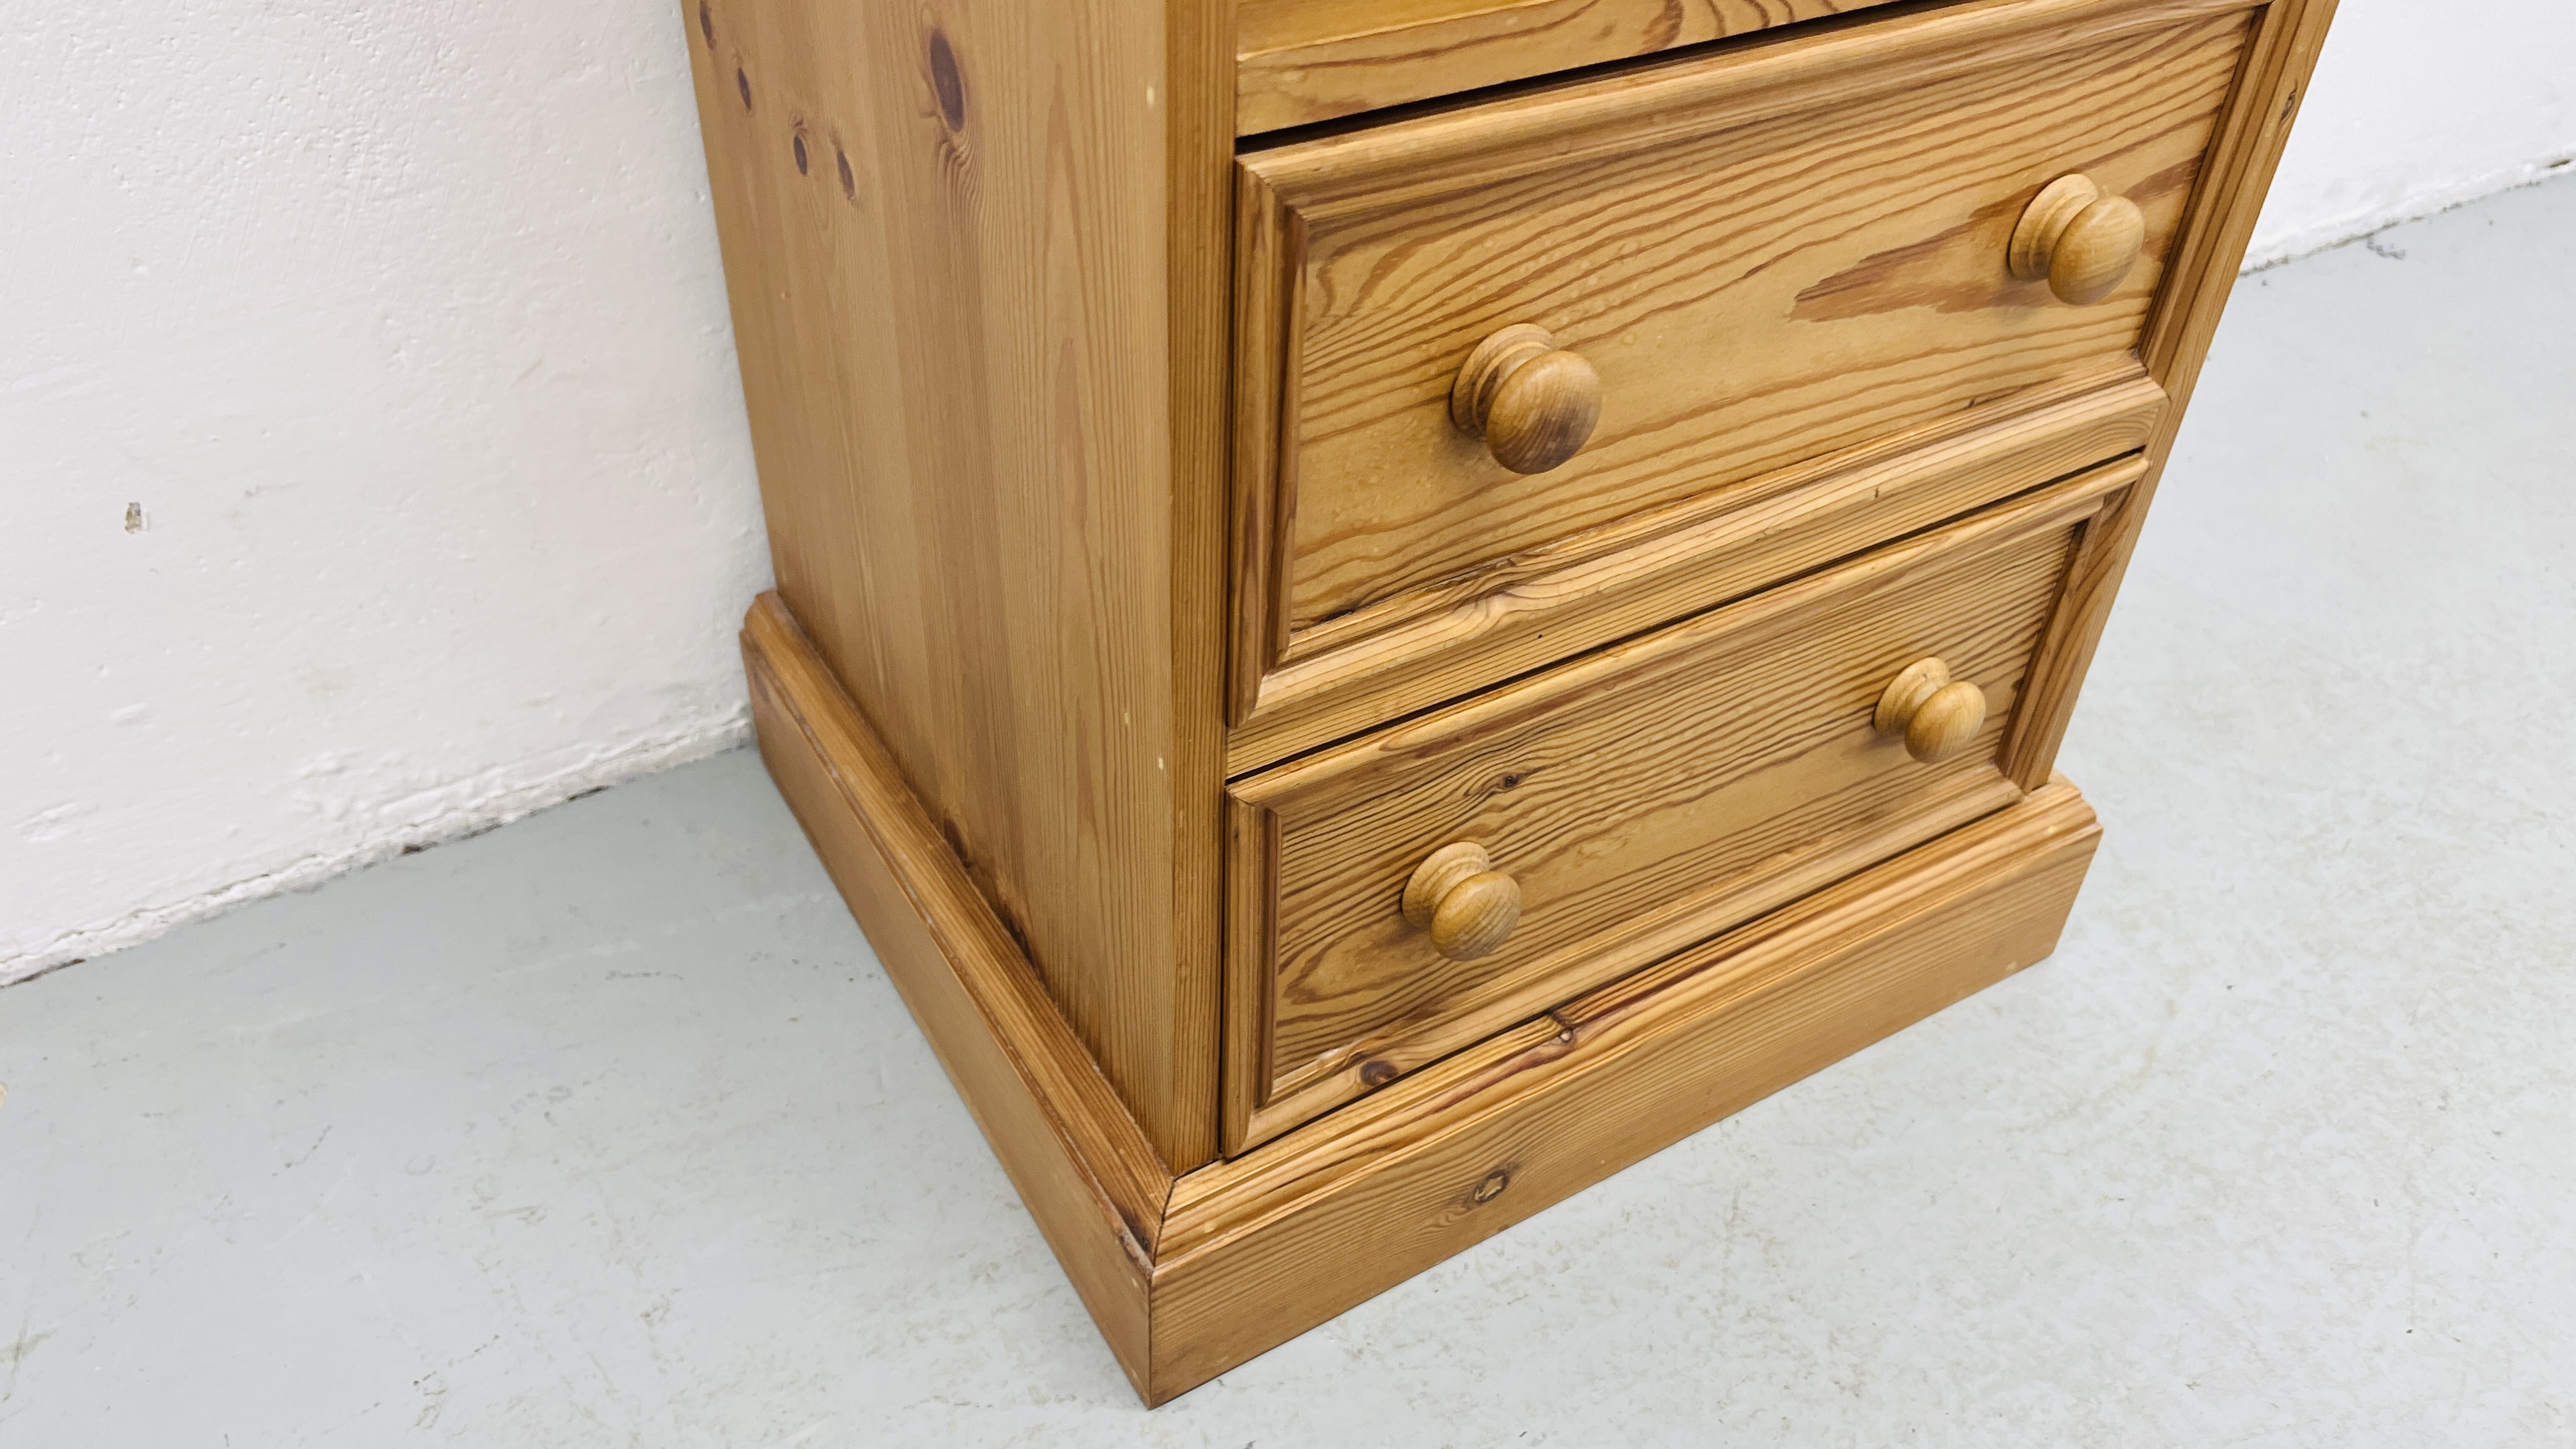 A WAXED PINE TWO DRAWER BEDSIDE CABINET WIDTH 45CM. DEPTH 38CM. HEIGHT 67CM. - Image 5 of 6